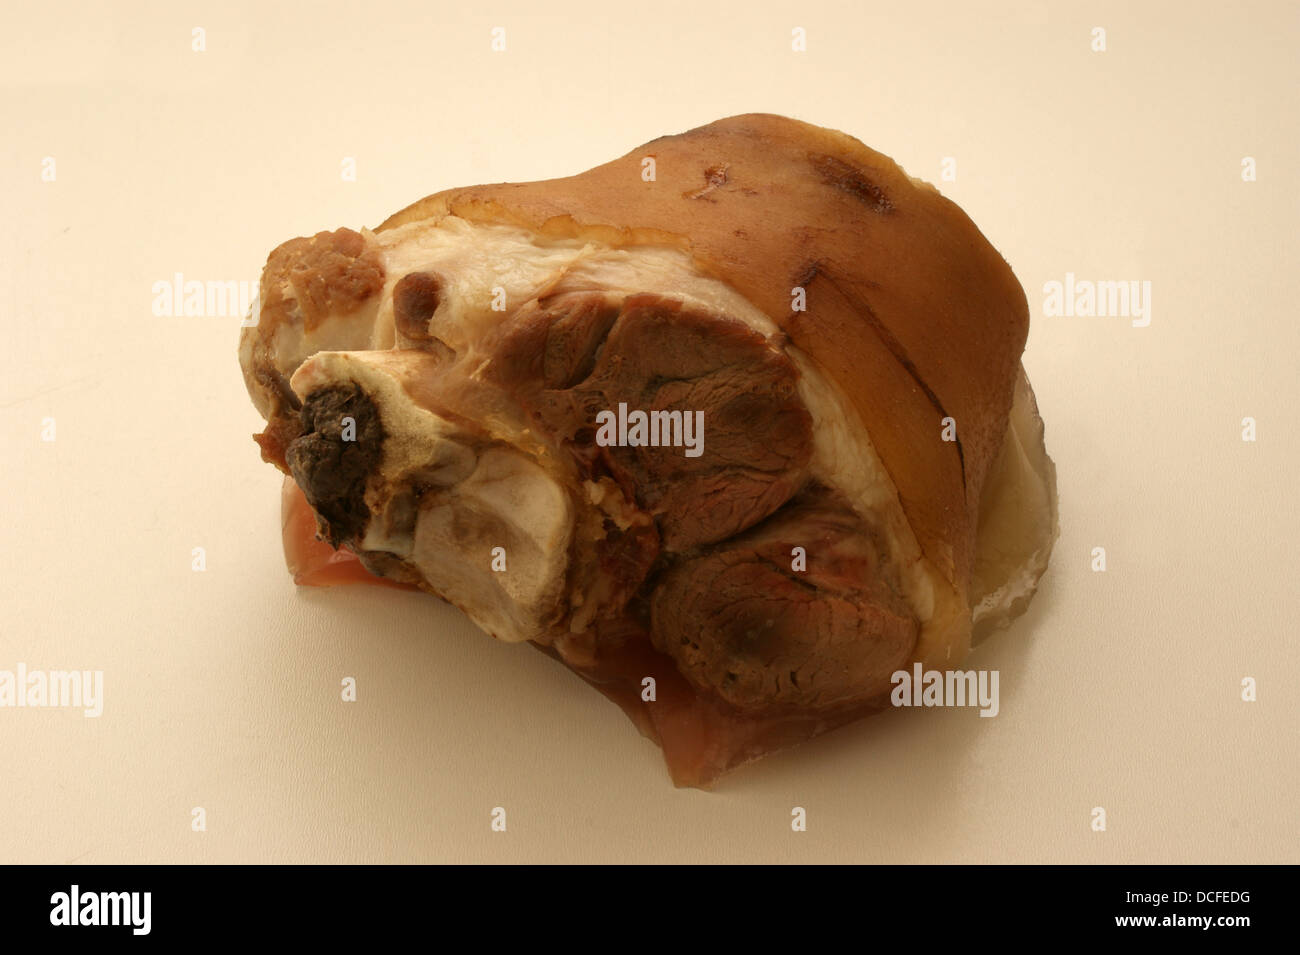 knuckle of pork and a bright background Stock Photo